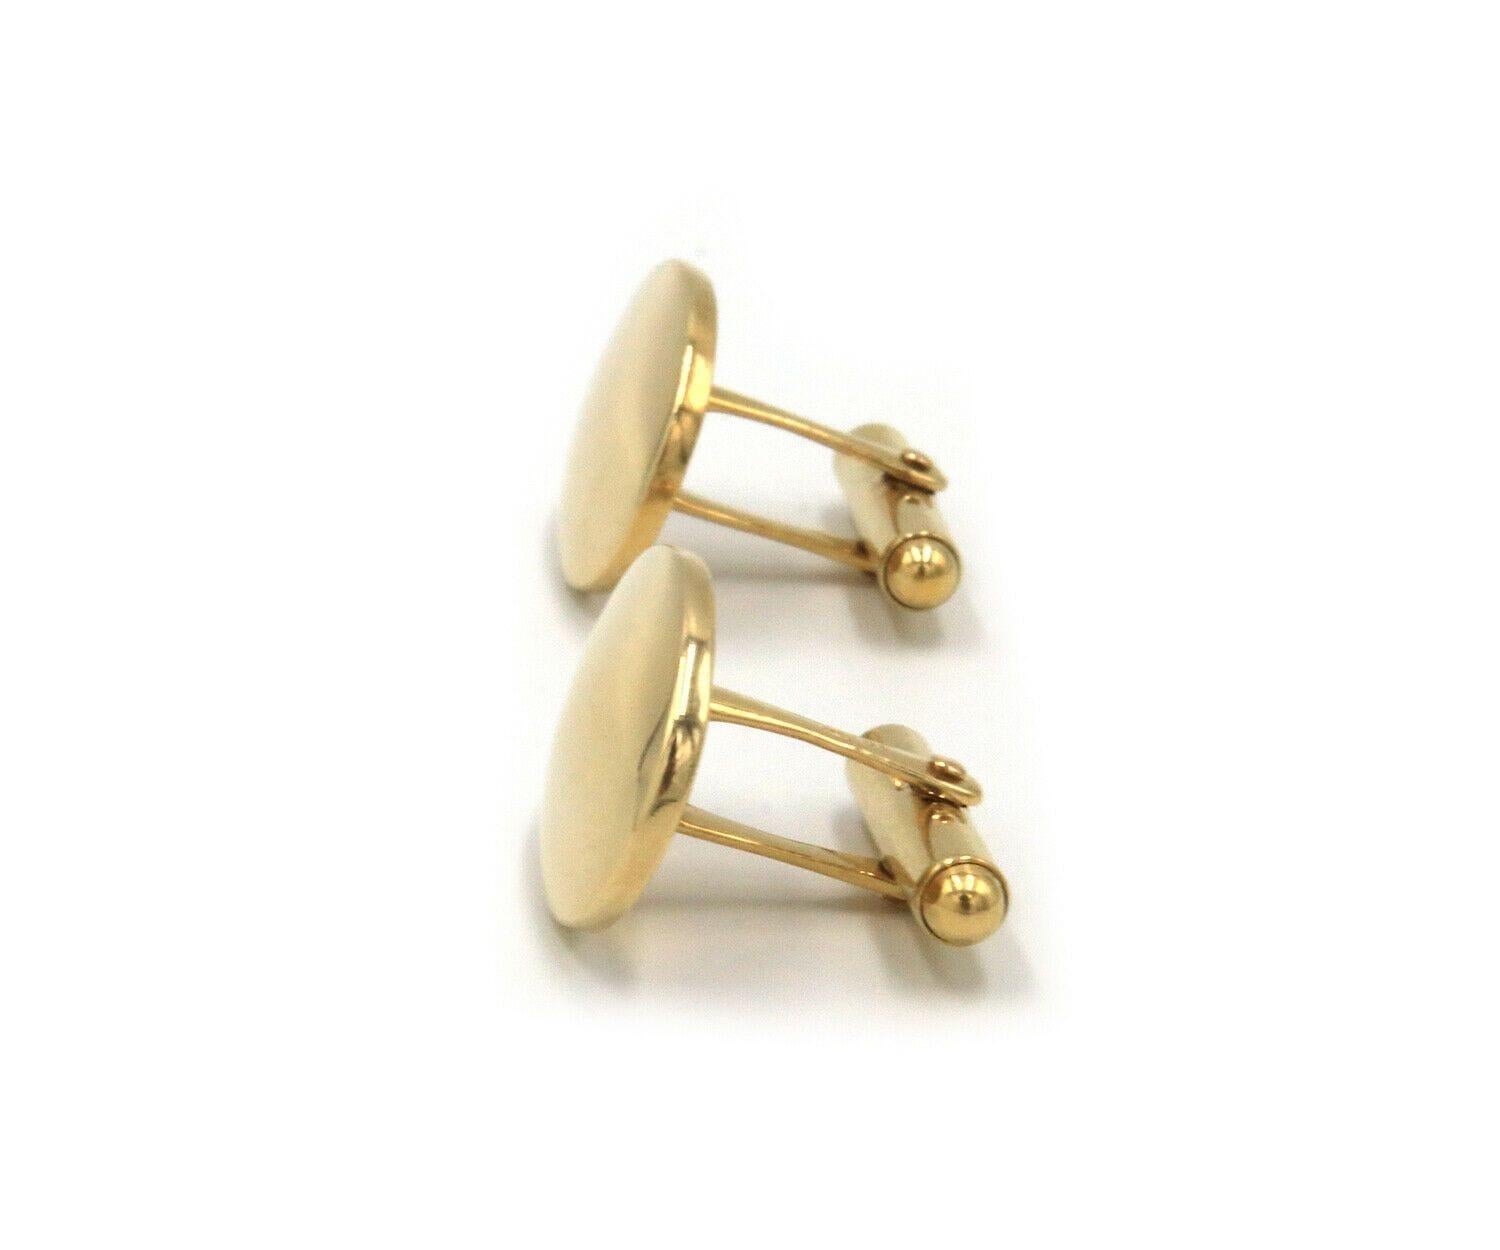 Polished Oval Cufflinks in 14K

Polished Oval Cufflinks
14K Yellow Gold
Cufflink Surface Dimensions: Approx. 20.50 X 15.0 MM
Weight: Approx. 15.60 Grams
Stamped: 14K

Condition:
Offered for your consideration is a pair of previously owned polished